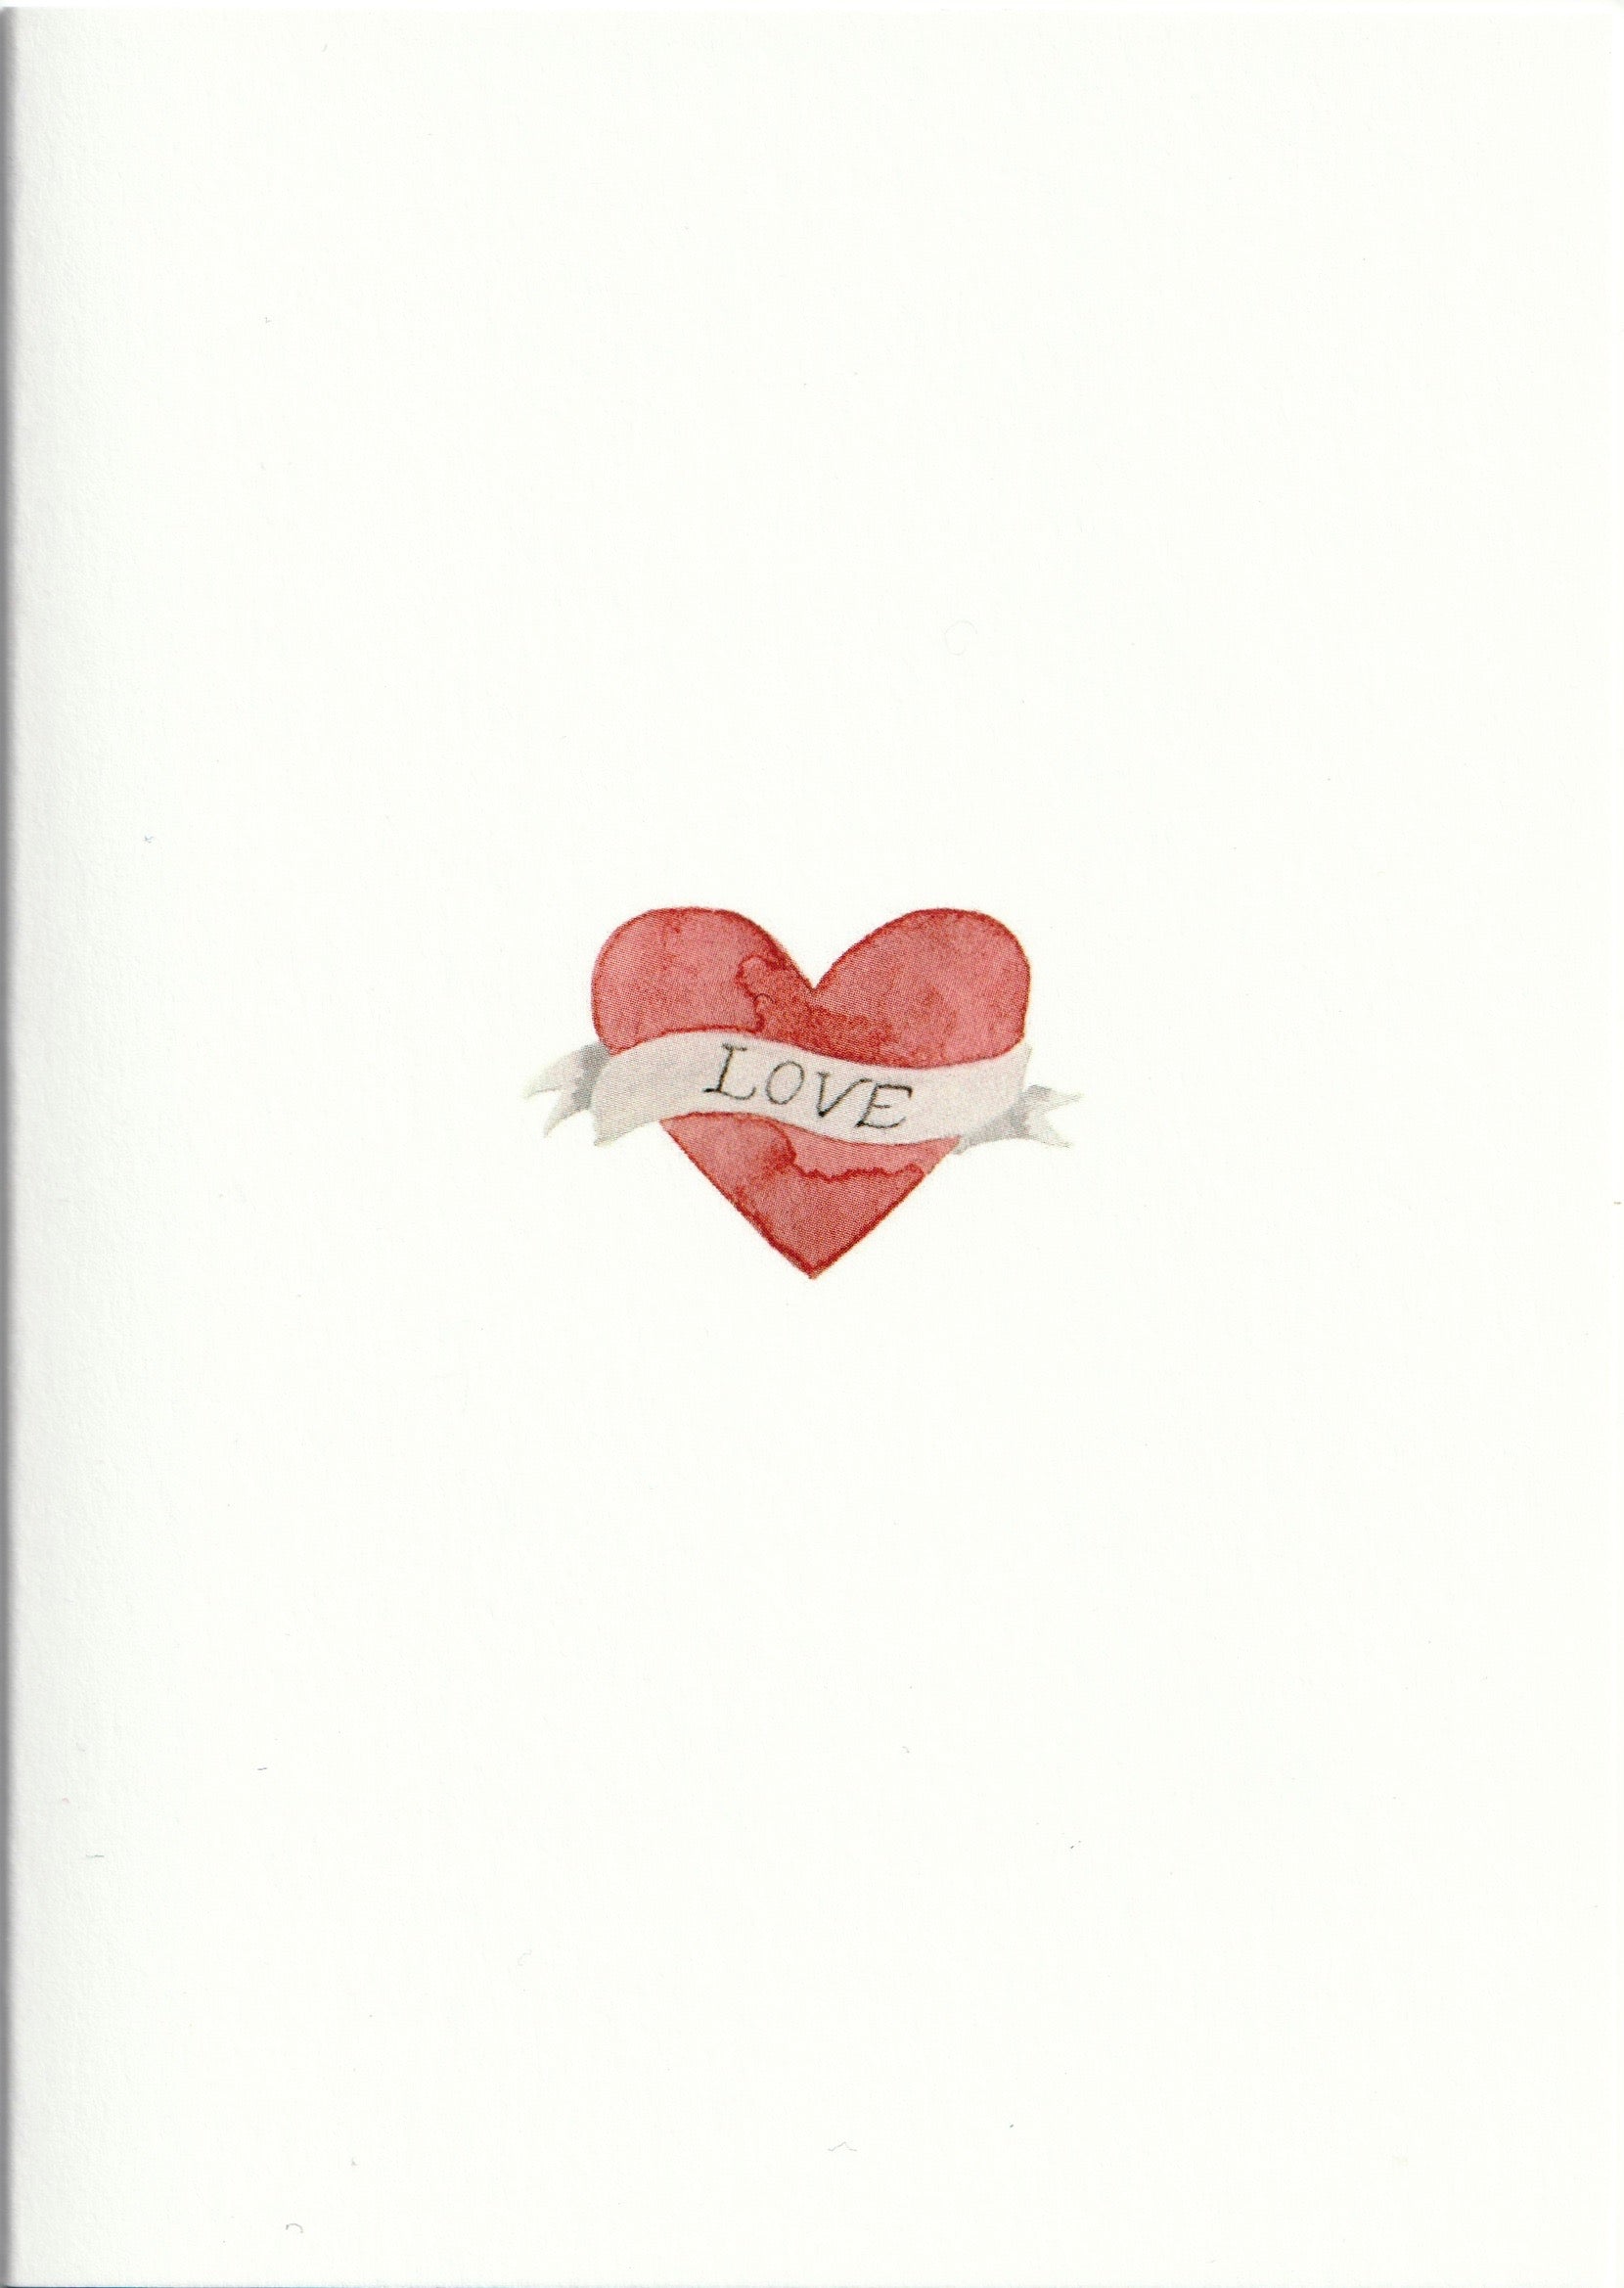 Pack of 5 Tattoo Heart Cards